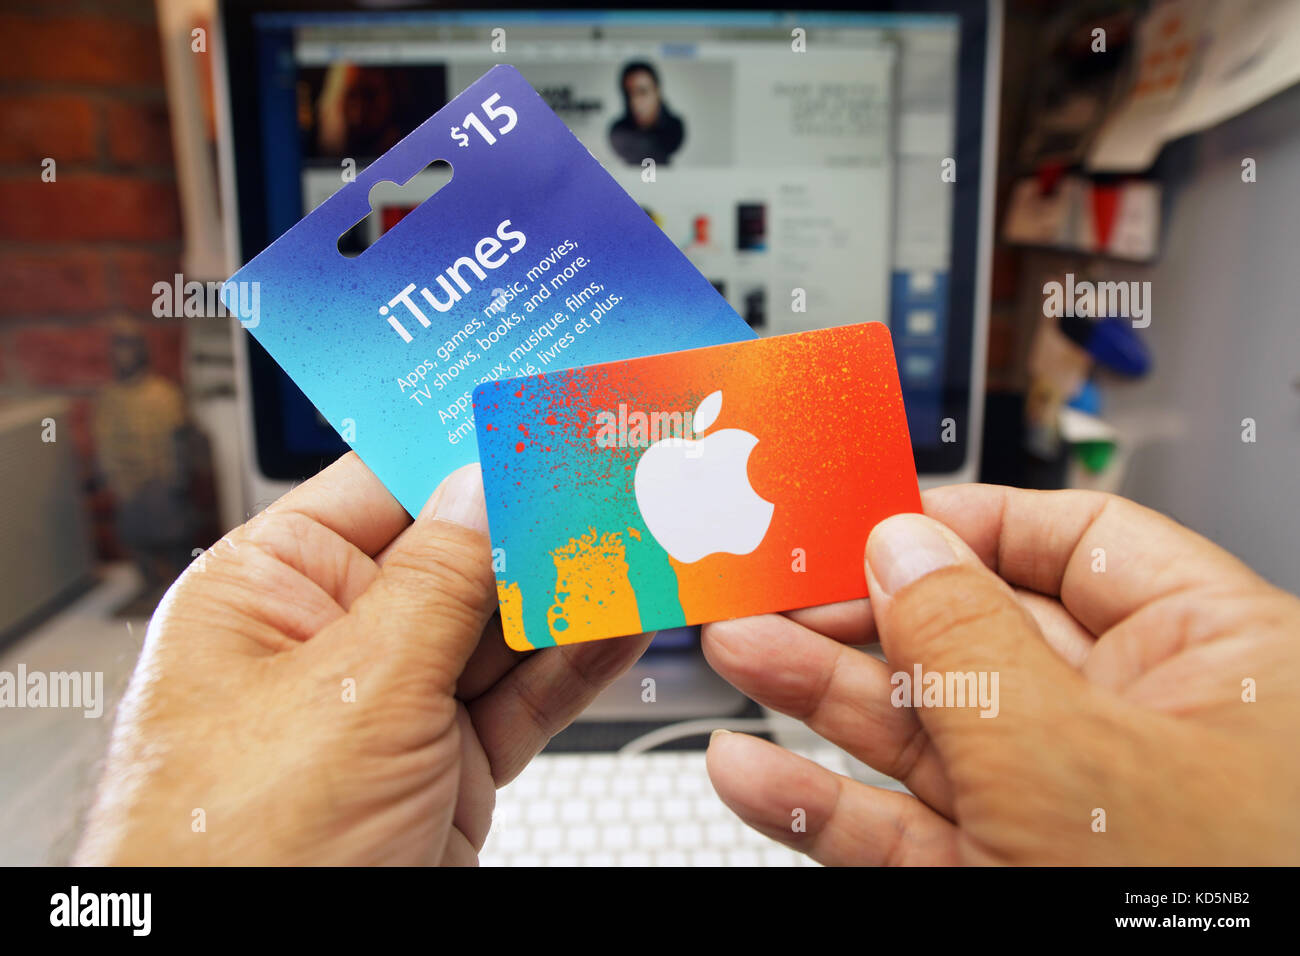 Itunes Gift Card Stock Photos - Free & Royalty-Free Stock Photos from  Dreamstime